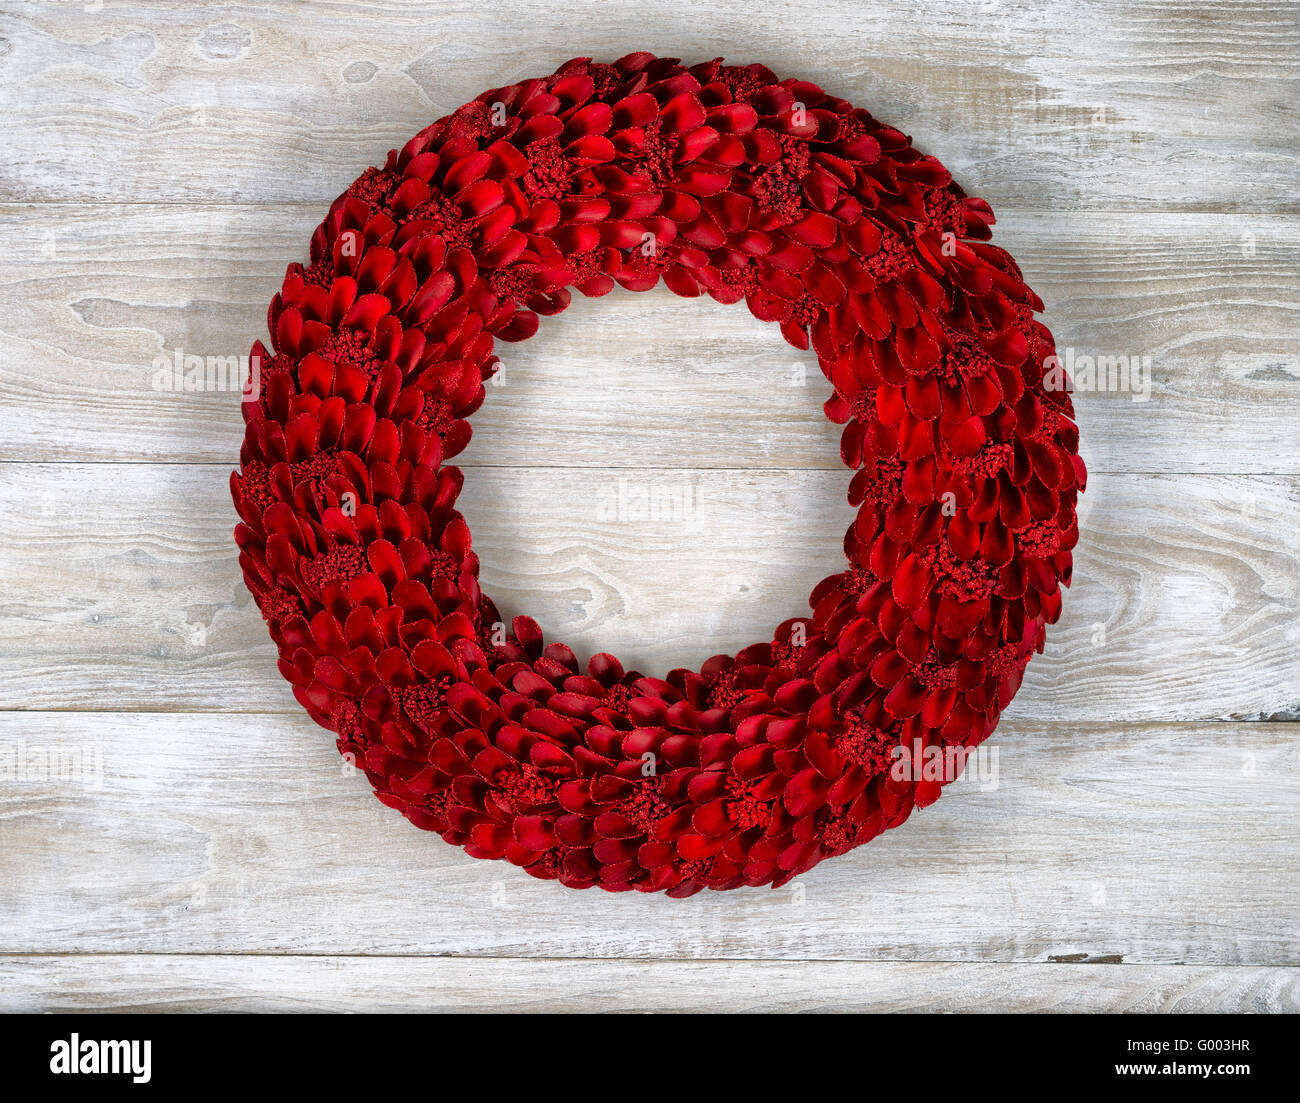 Wooden Red Wreath on White aged boards Stock Photo